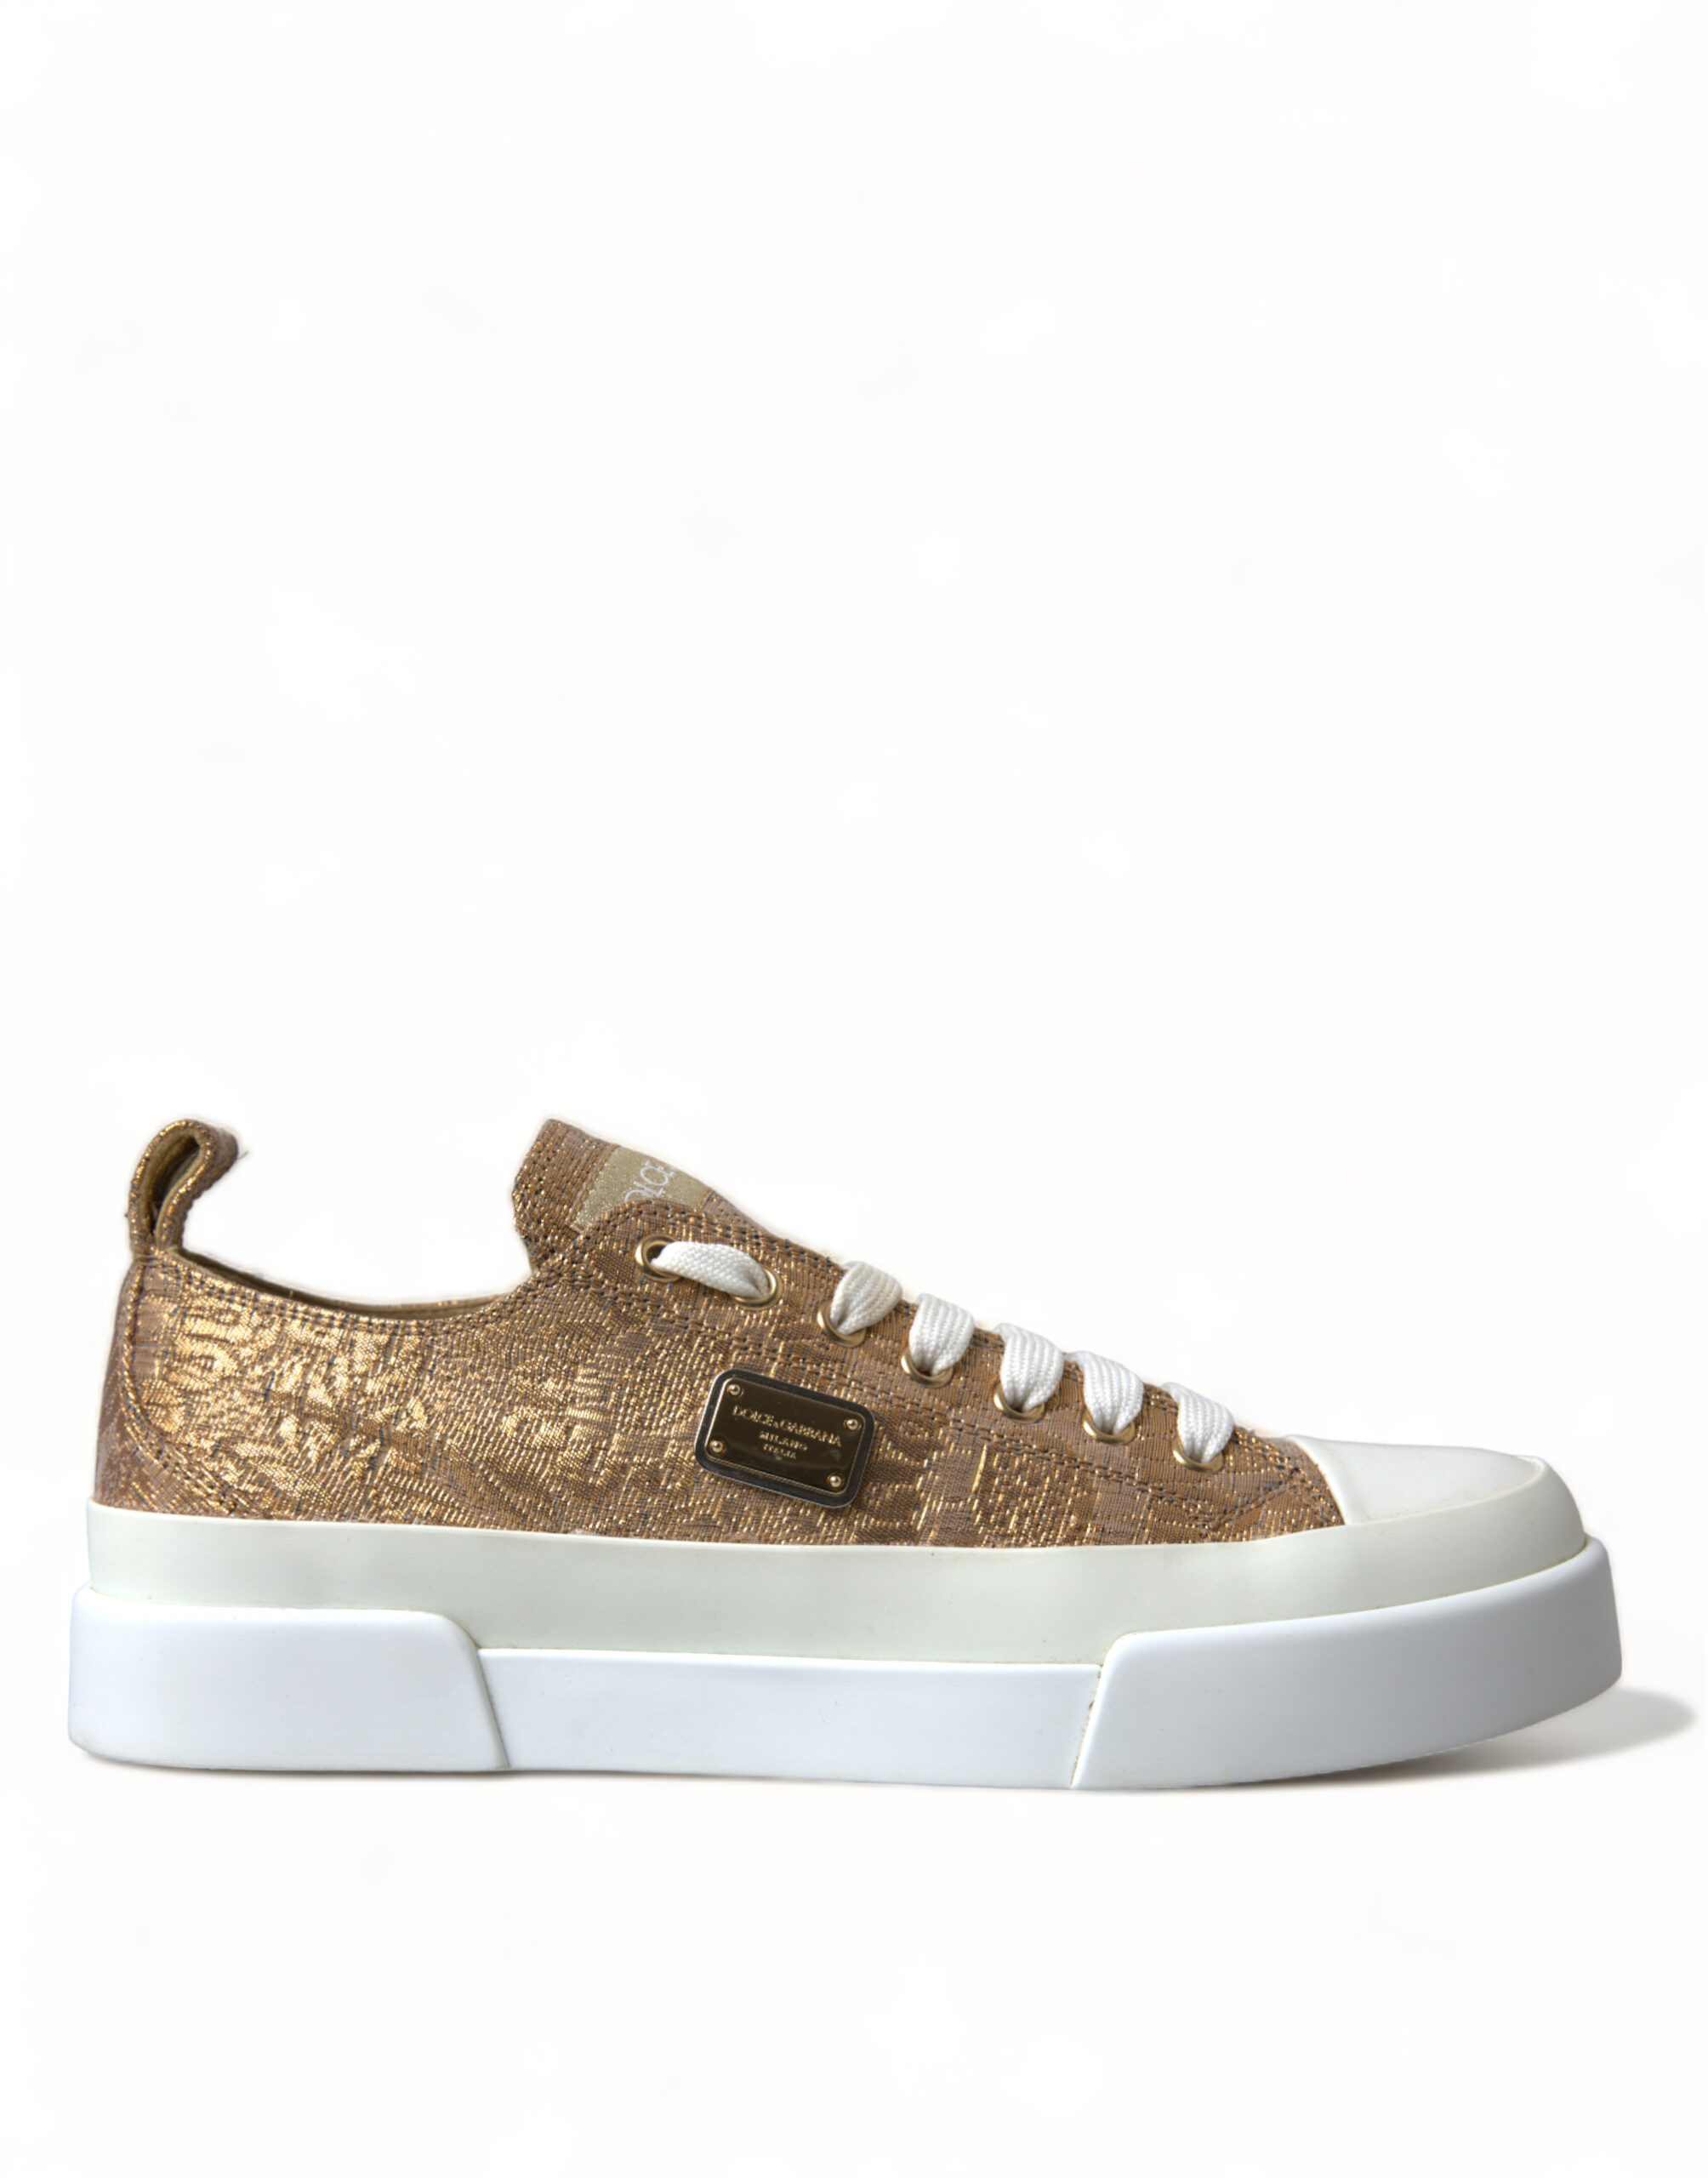 Elegant Gold Low-Top Sneakers - Chic Comfort Footwear BY Dolce & Gabbana - Shoes available at DOYUF